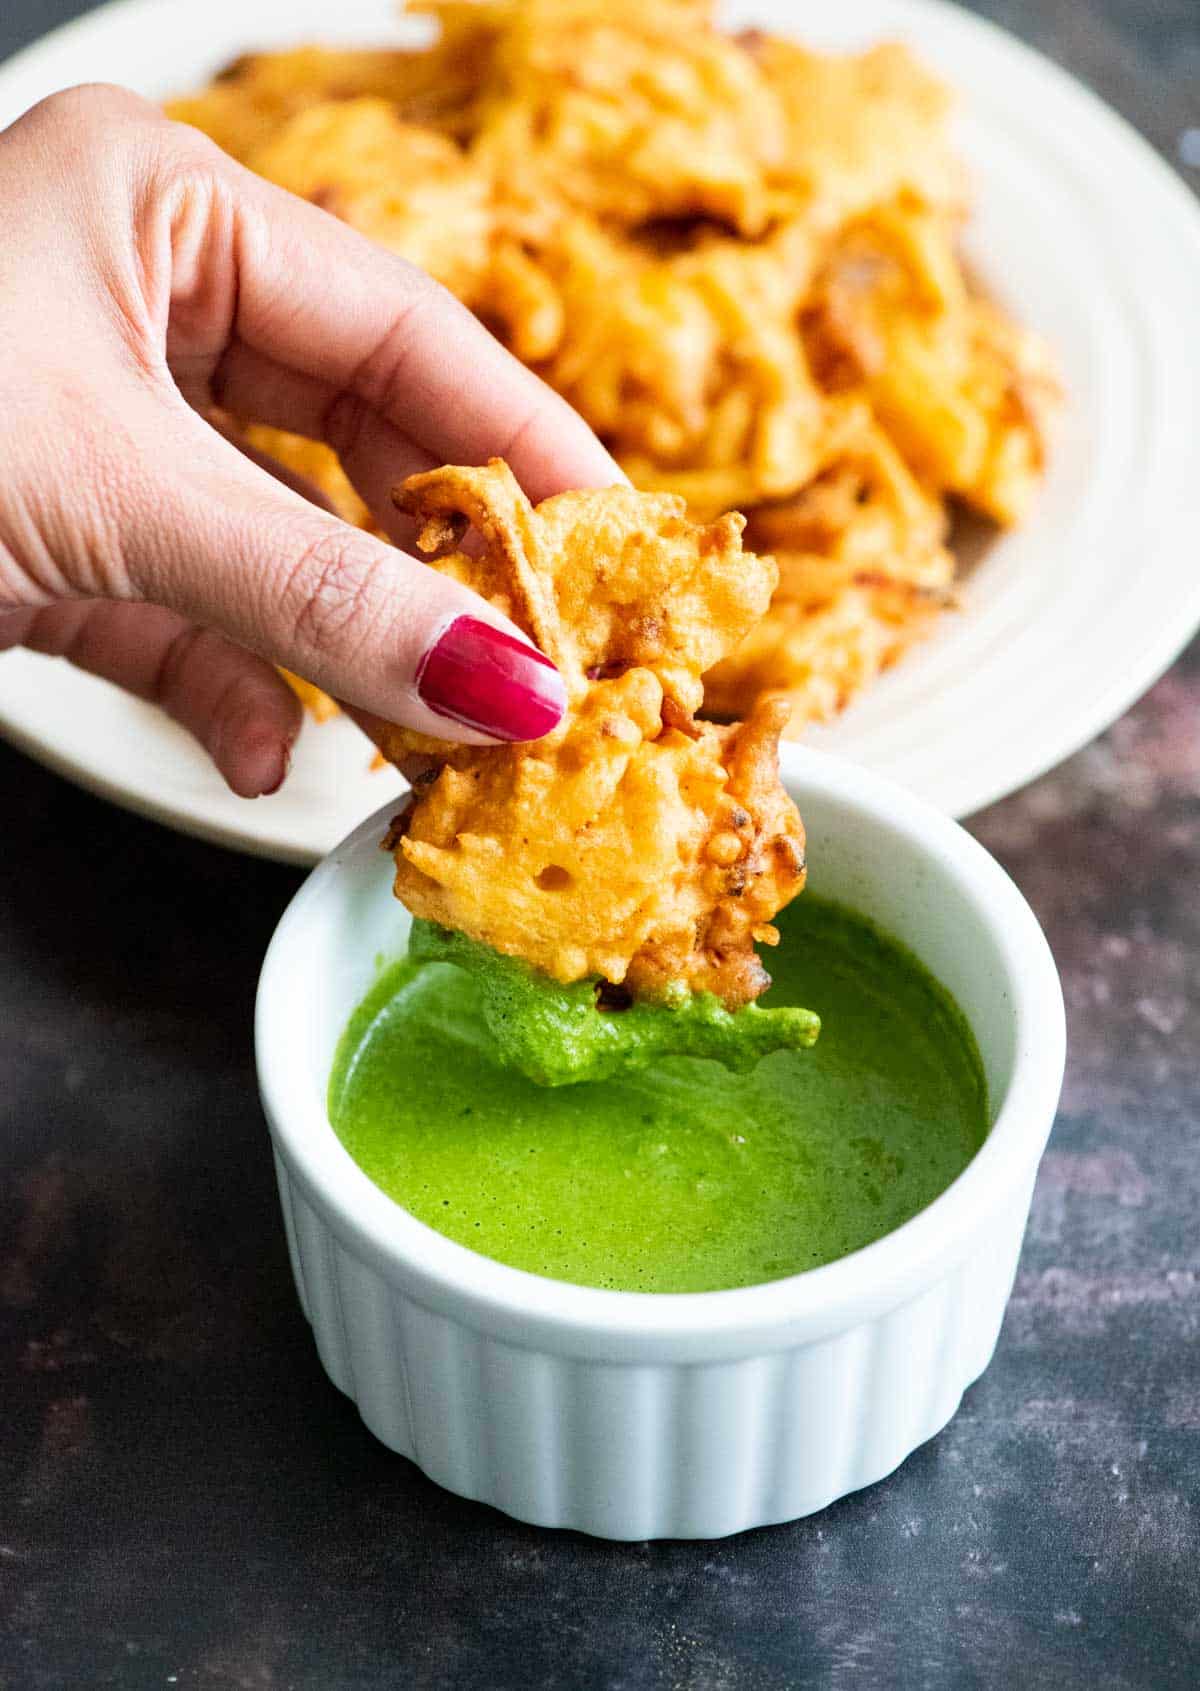 Fingers holding a fritter dipped in a white ramekin filled with green chutney